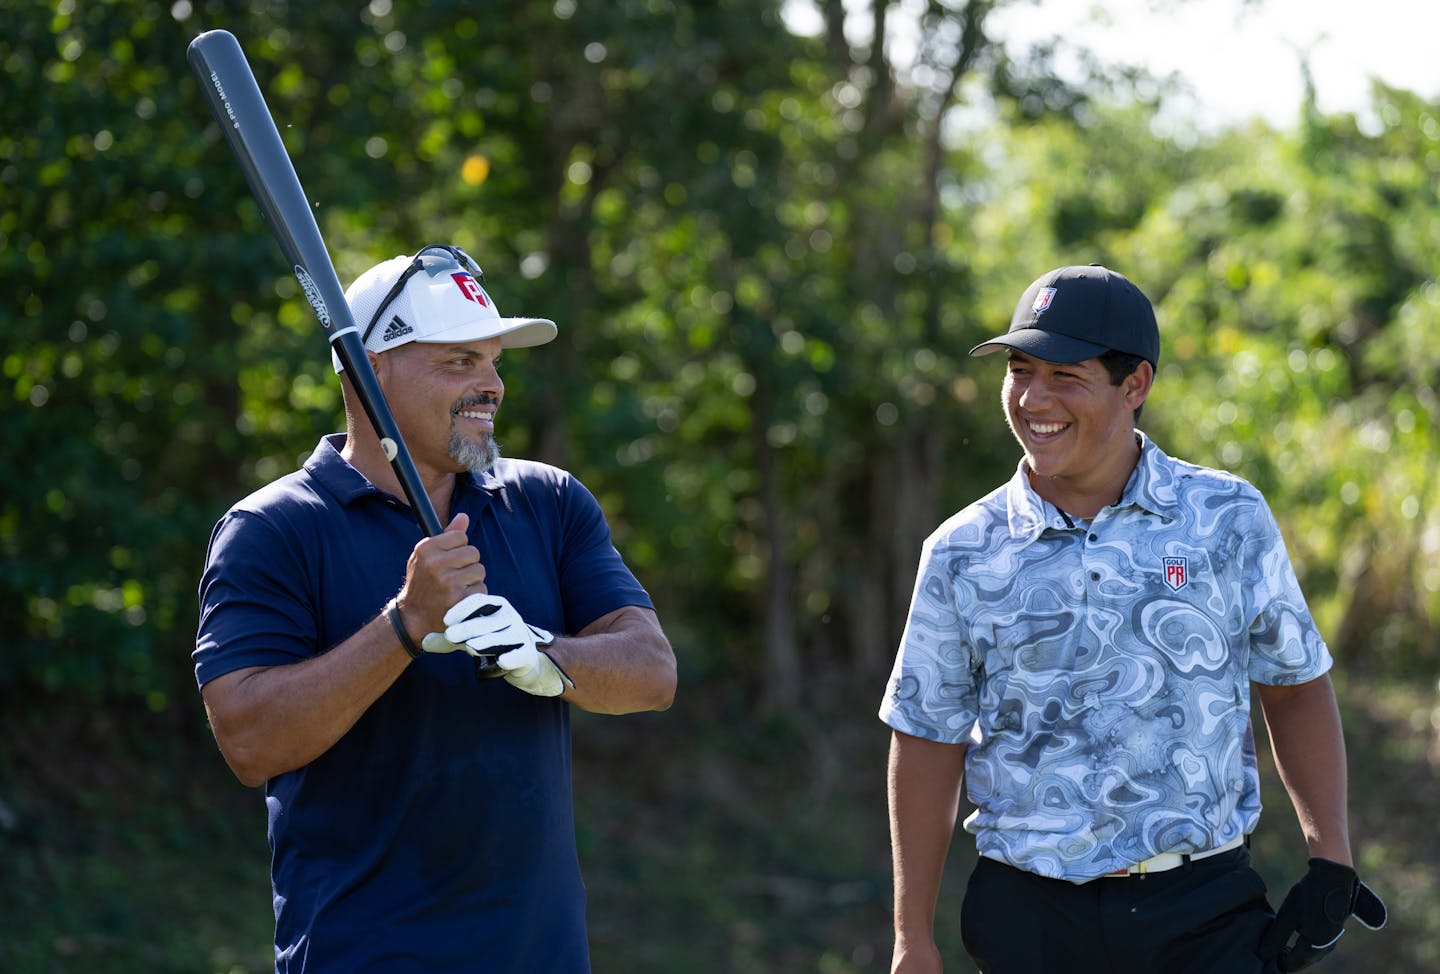 Iván "Pudge" Rodríguez, former MLB player, and Kelvin Hernández take part in a golf and baseball "nearest to the pin" event